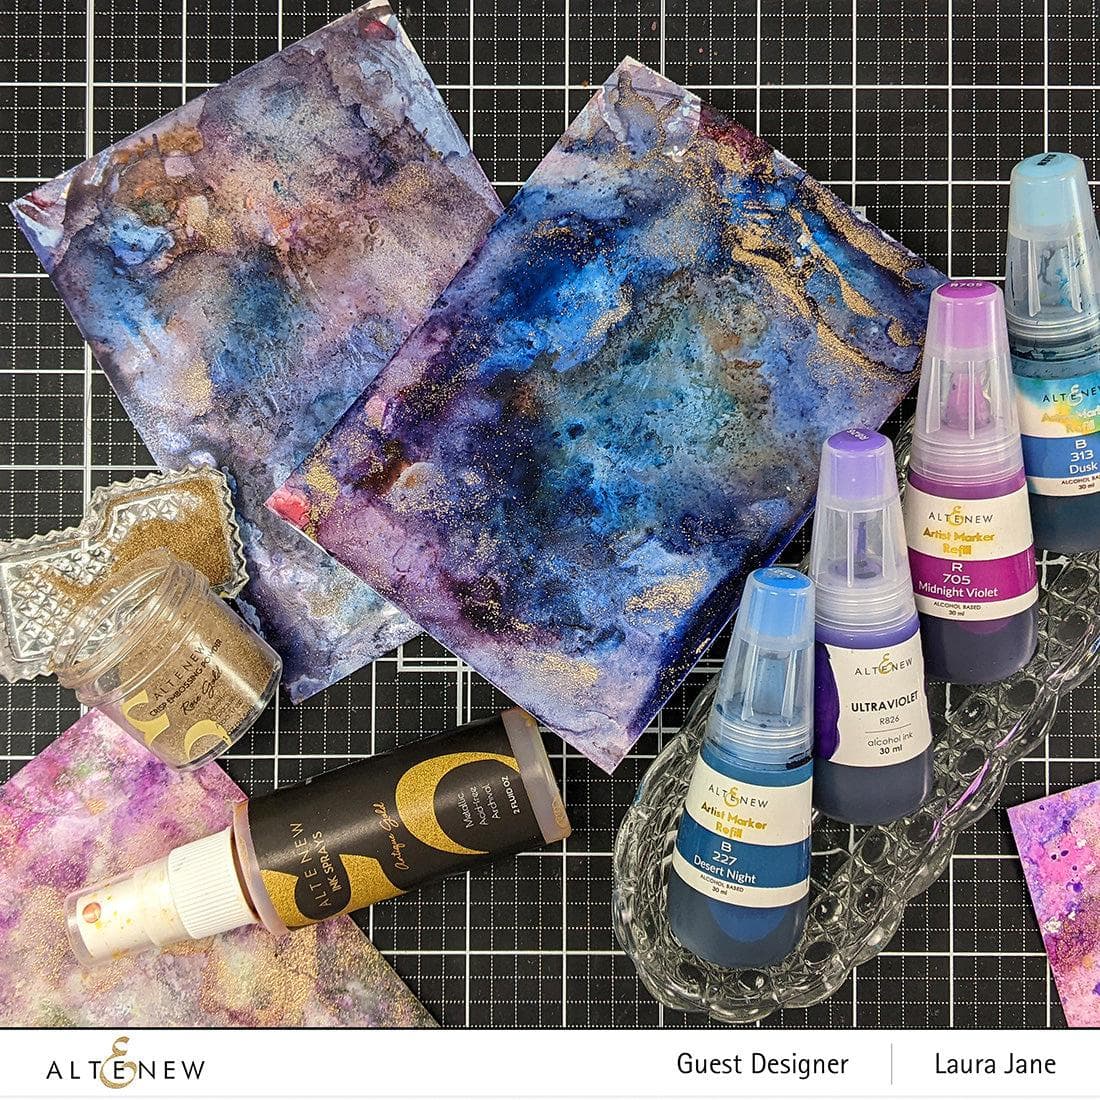 Be Creative Arts Crafts Alcohol Ink Midnight Violet Alcohol Ink